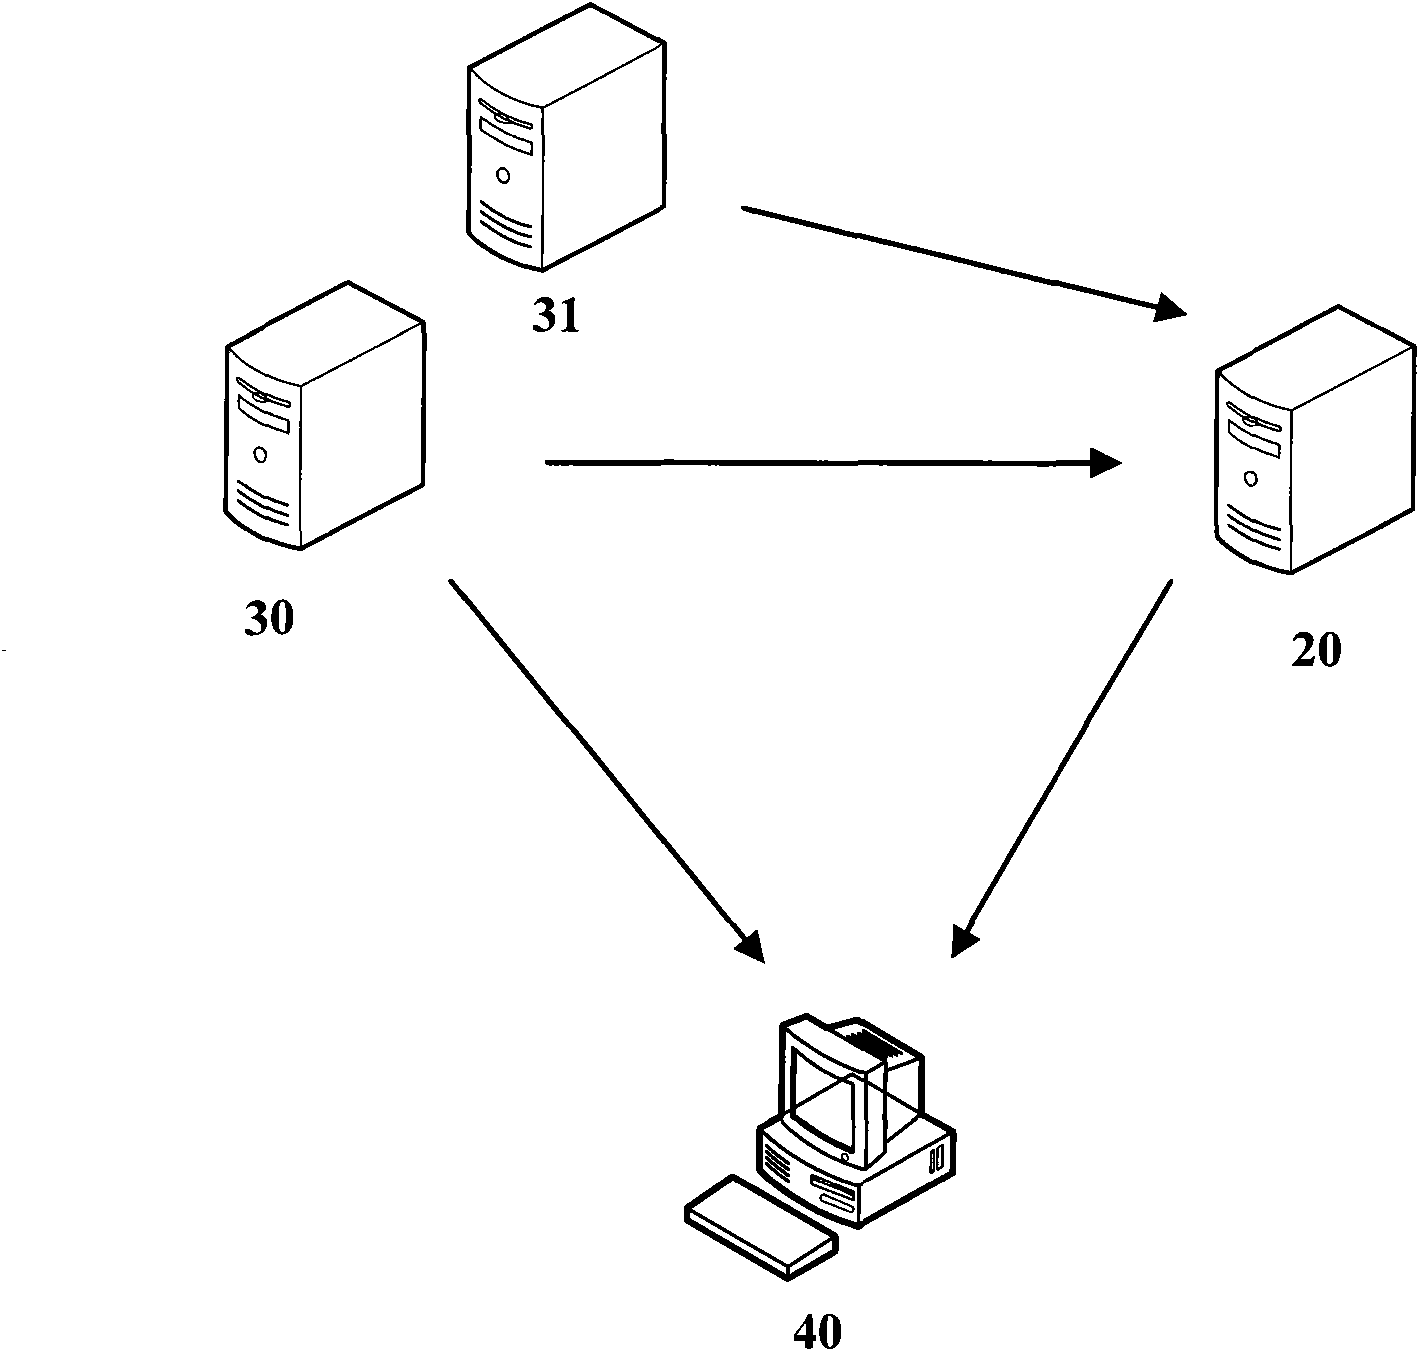 Method and device for providing electric program, publishing and presenting advertisement